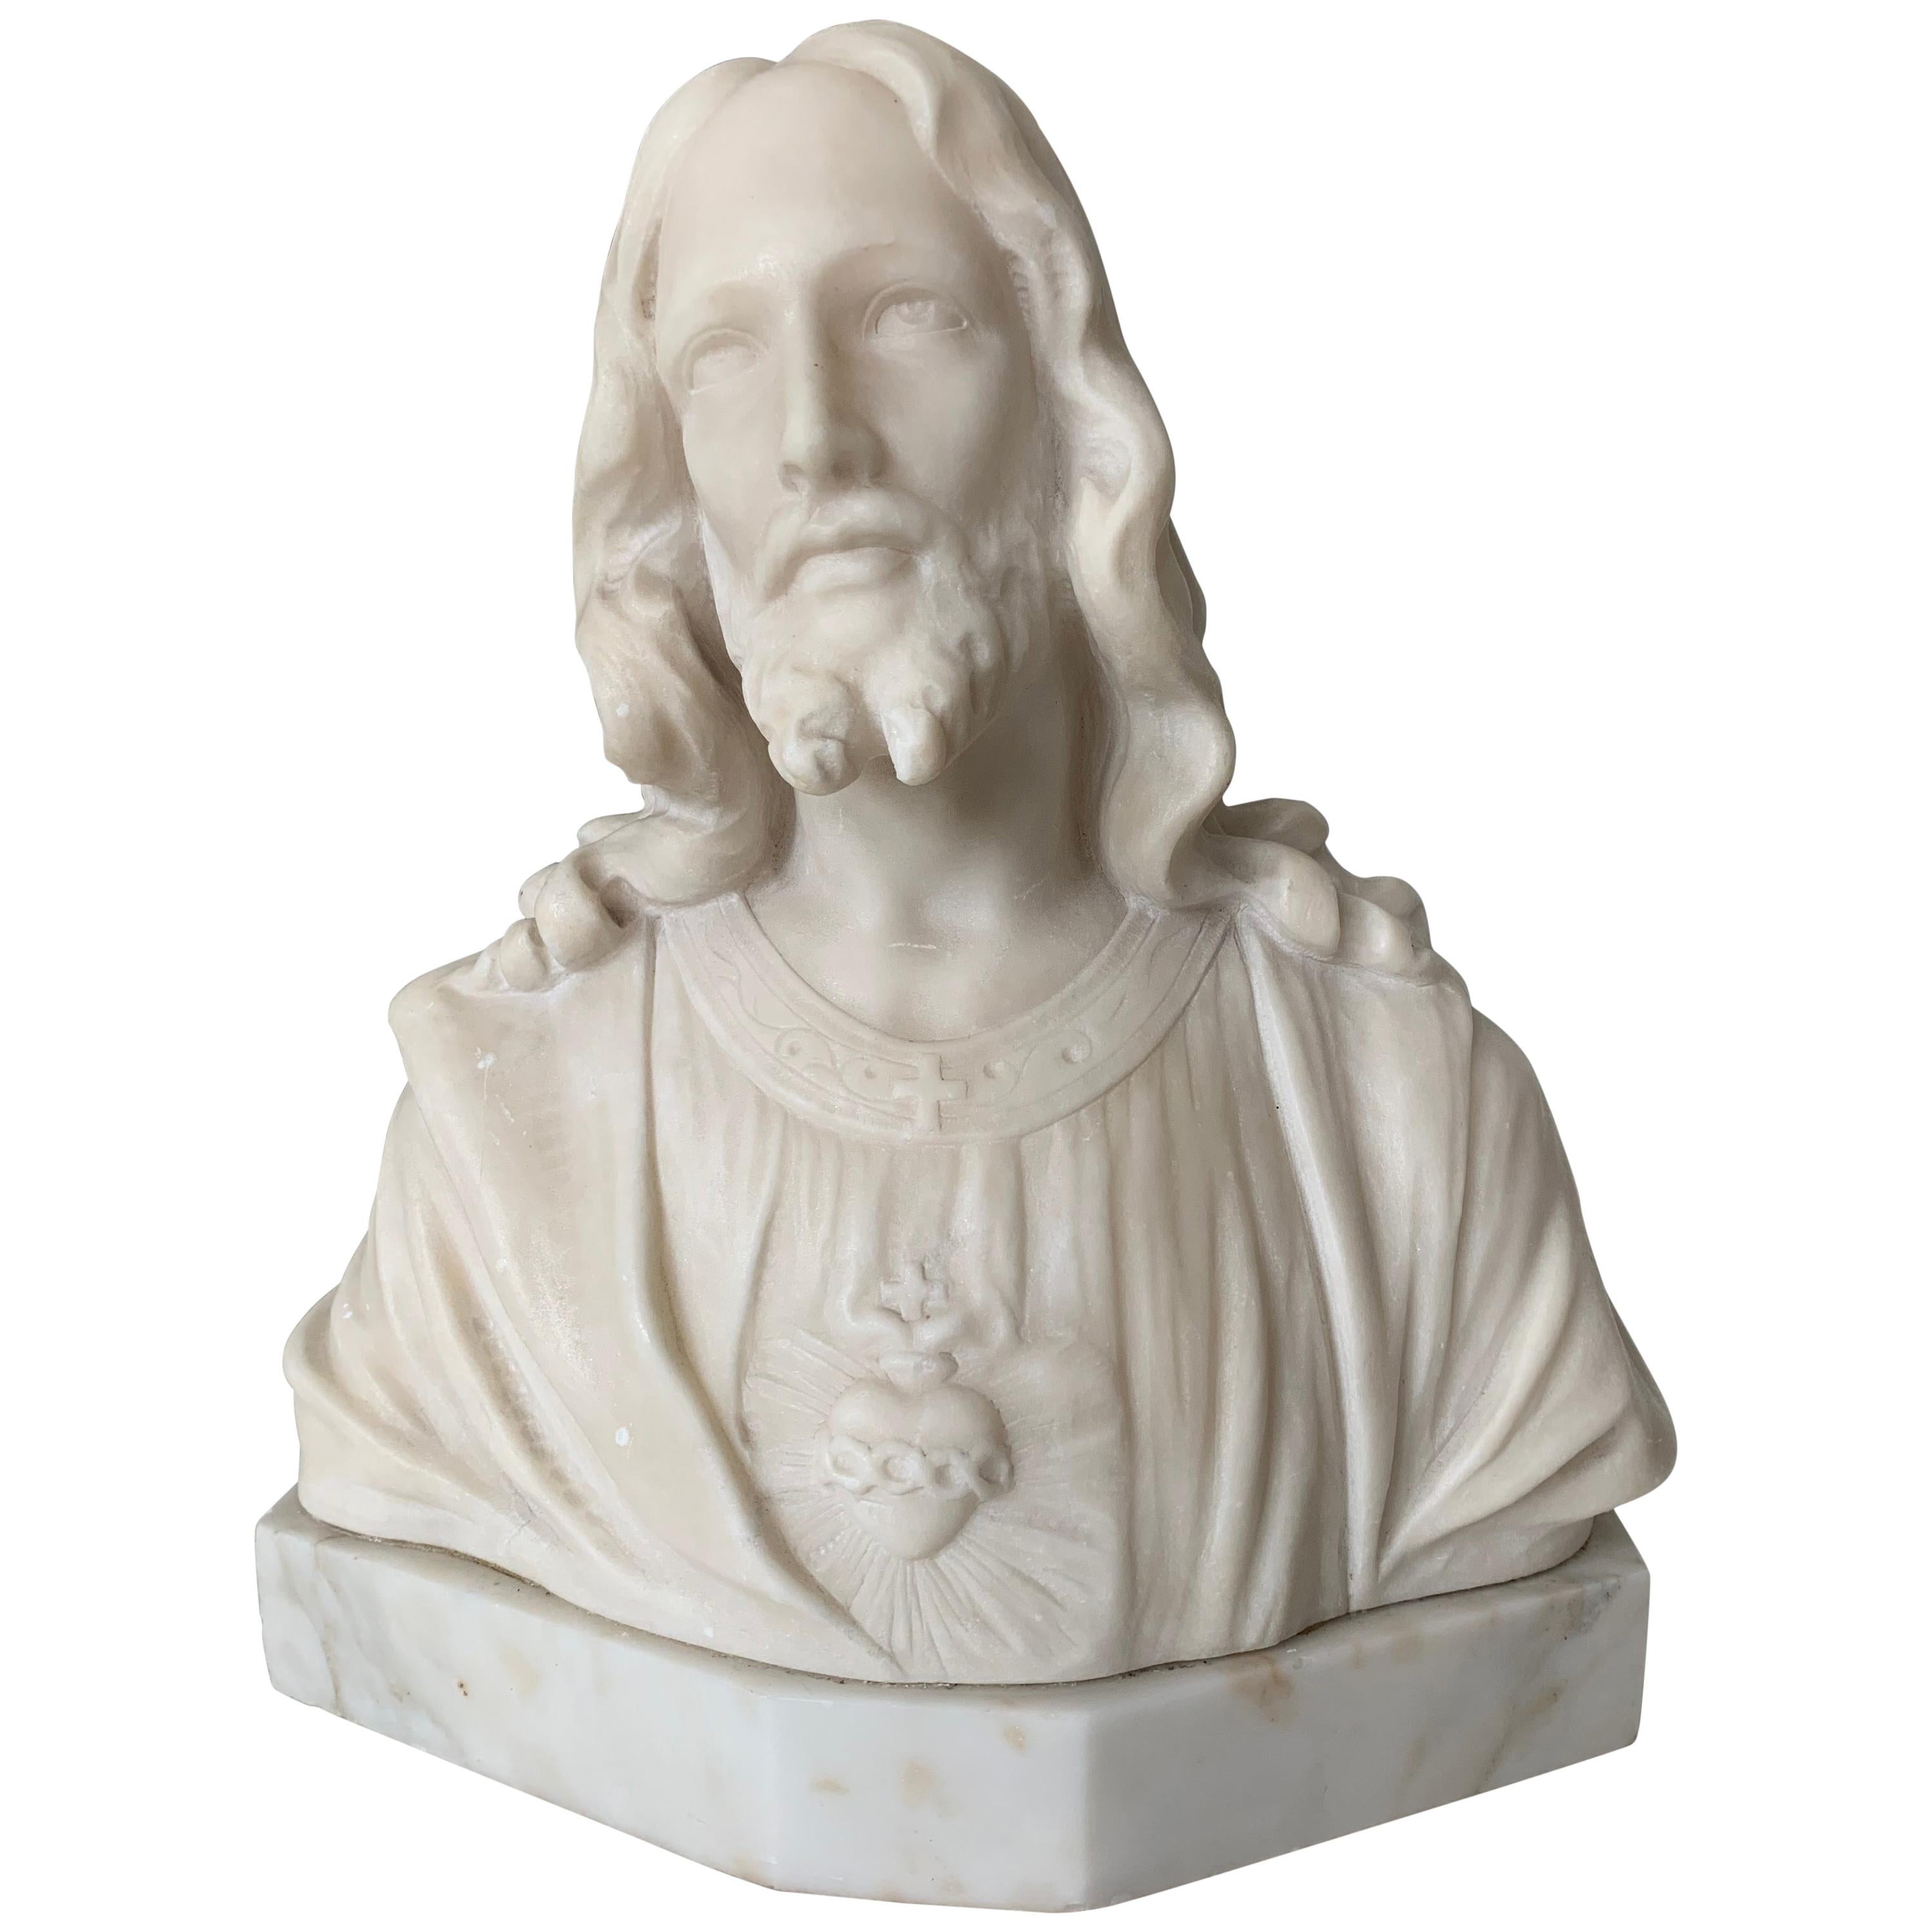 Early 1900s Signed Marble Sculpture / Bust of Jesus Christ on an Art Deco Base